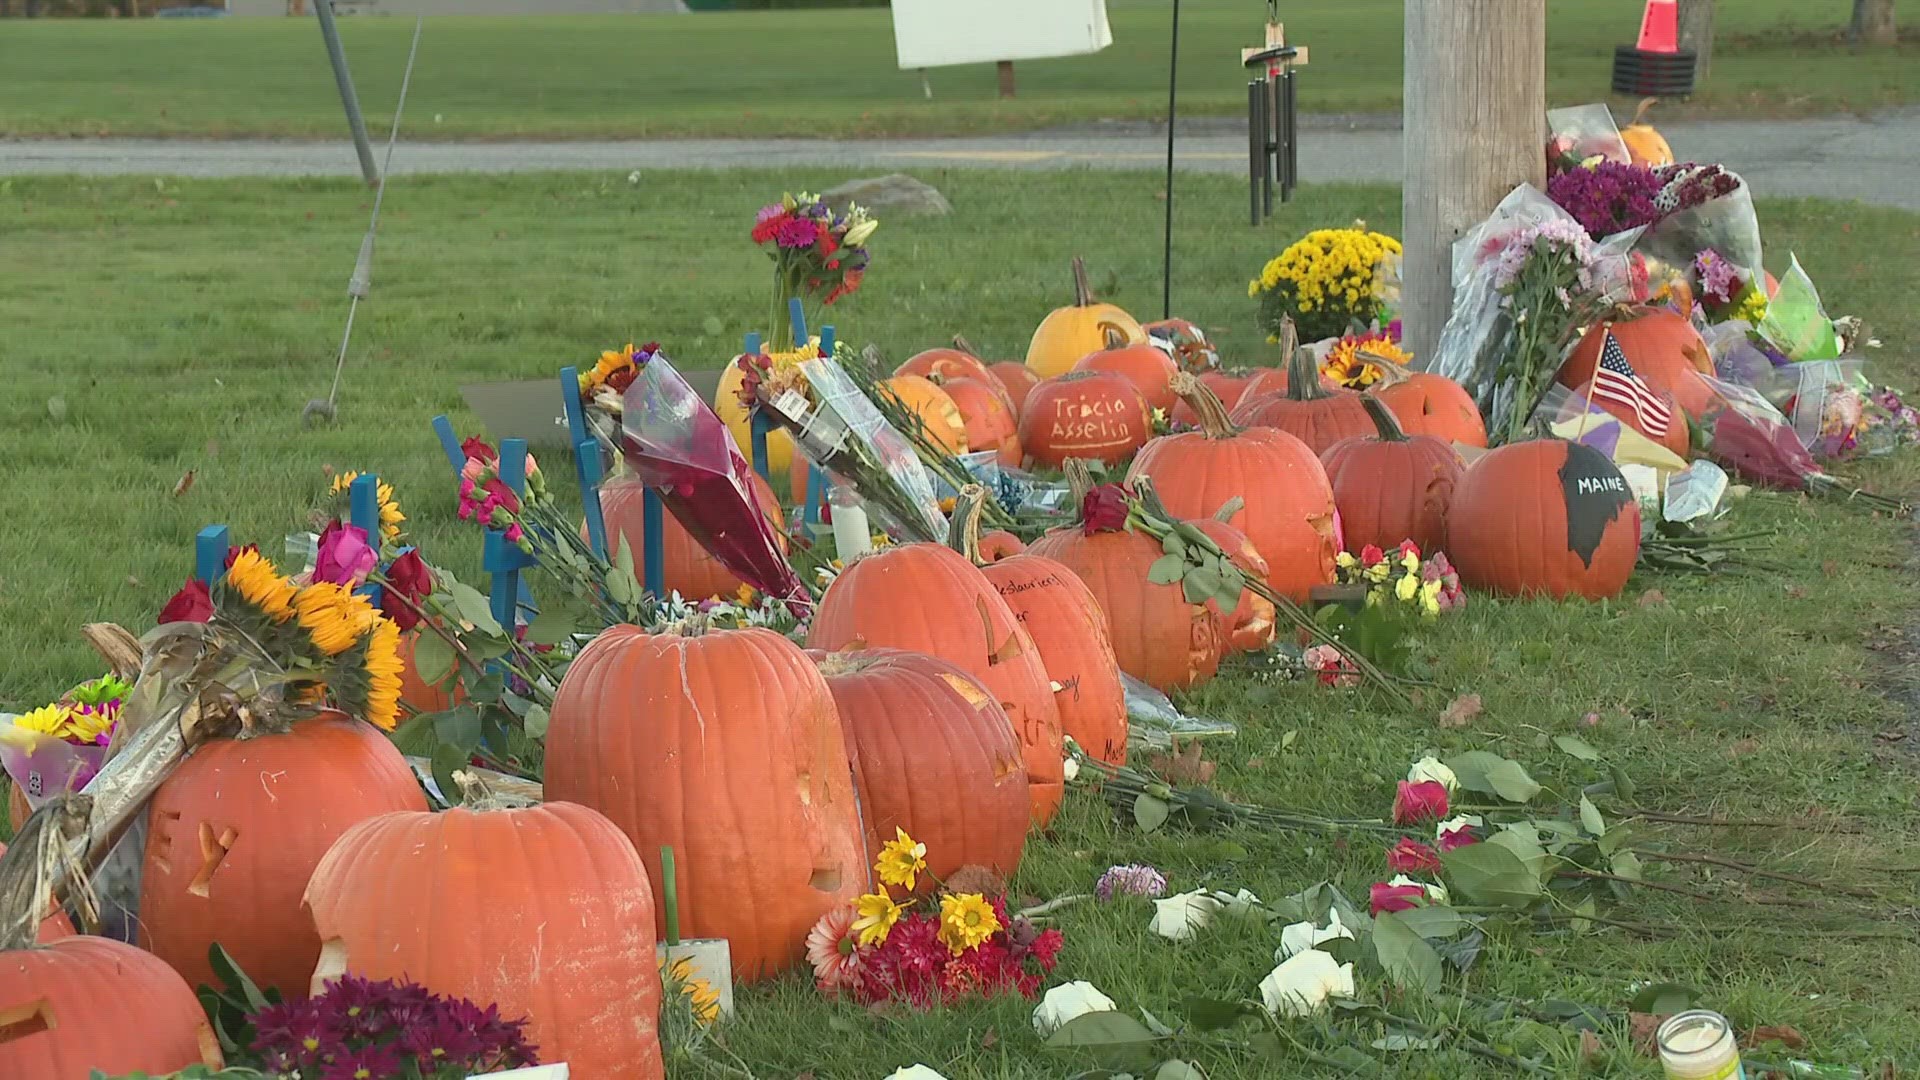 A spokesperson said they want to ensure the victims' loved ones aren't burdened with the cost.